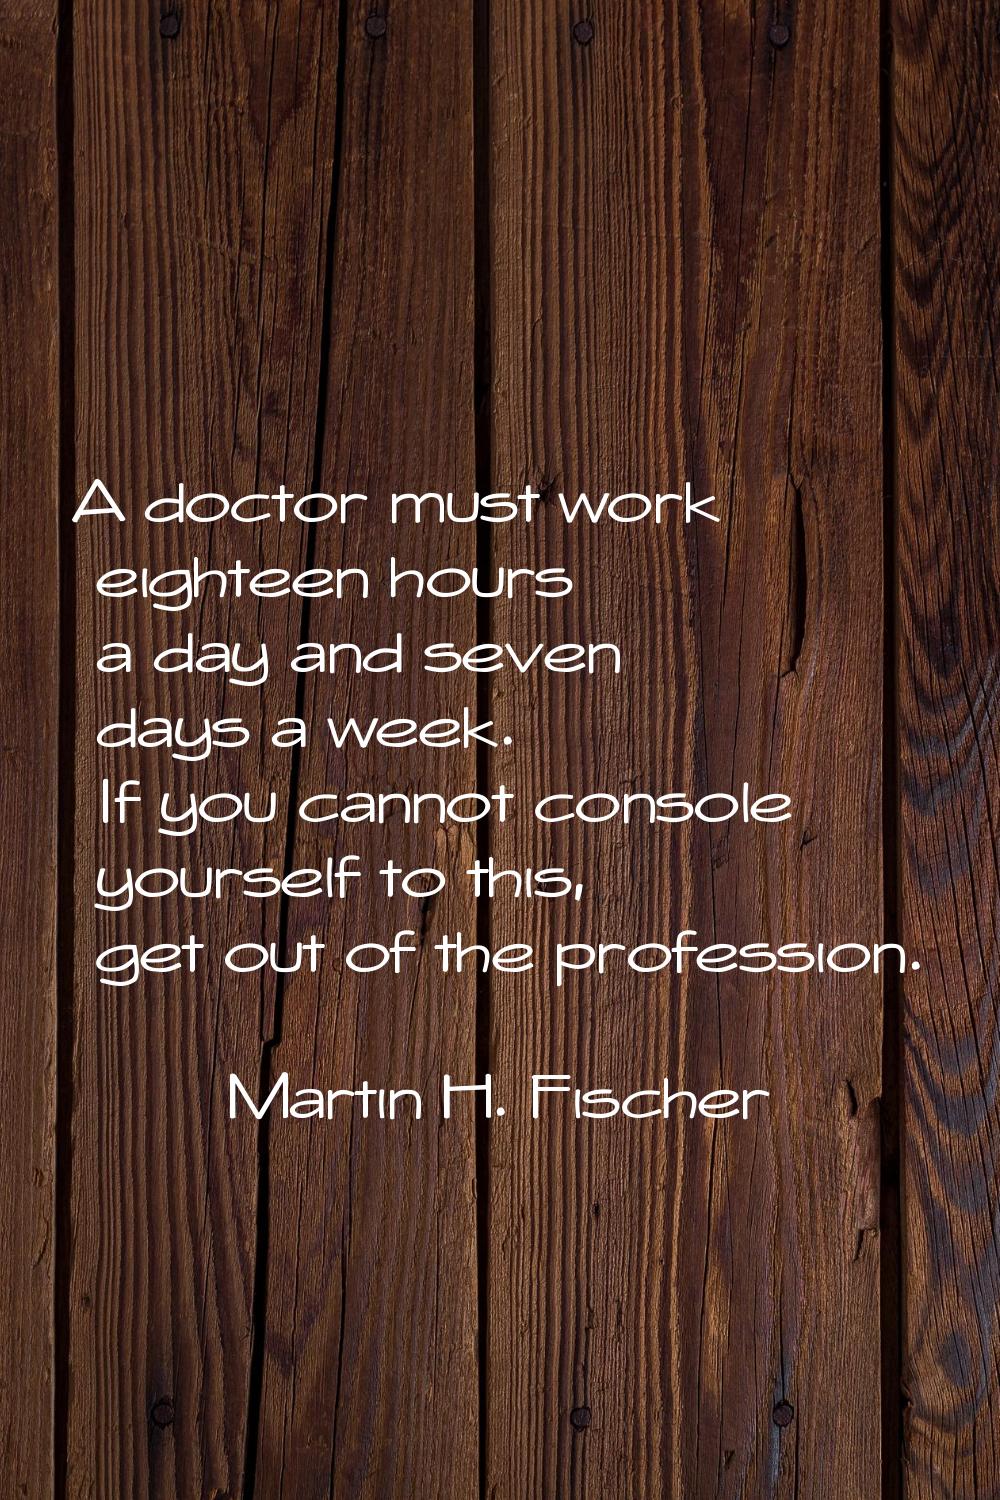 A doctor must work eighteen hours a day and seven days a week. If you cannot console yourself to th